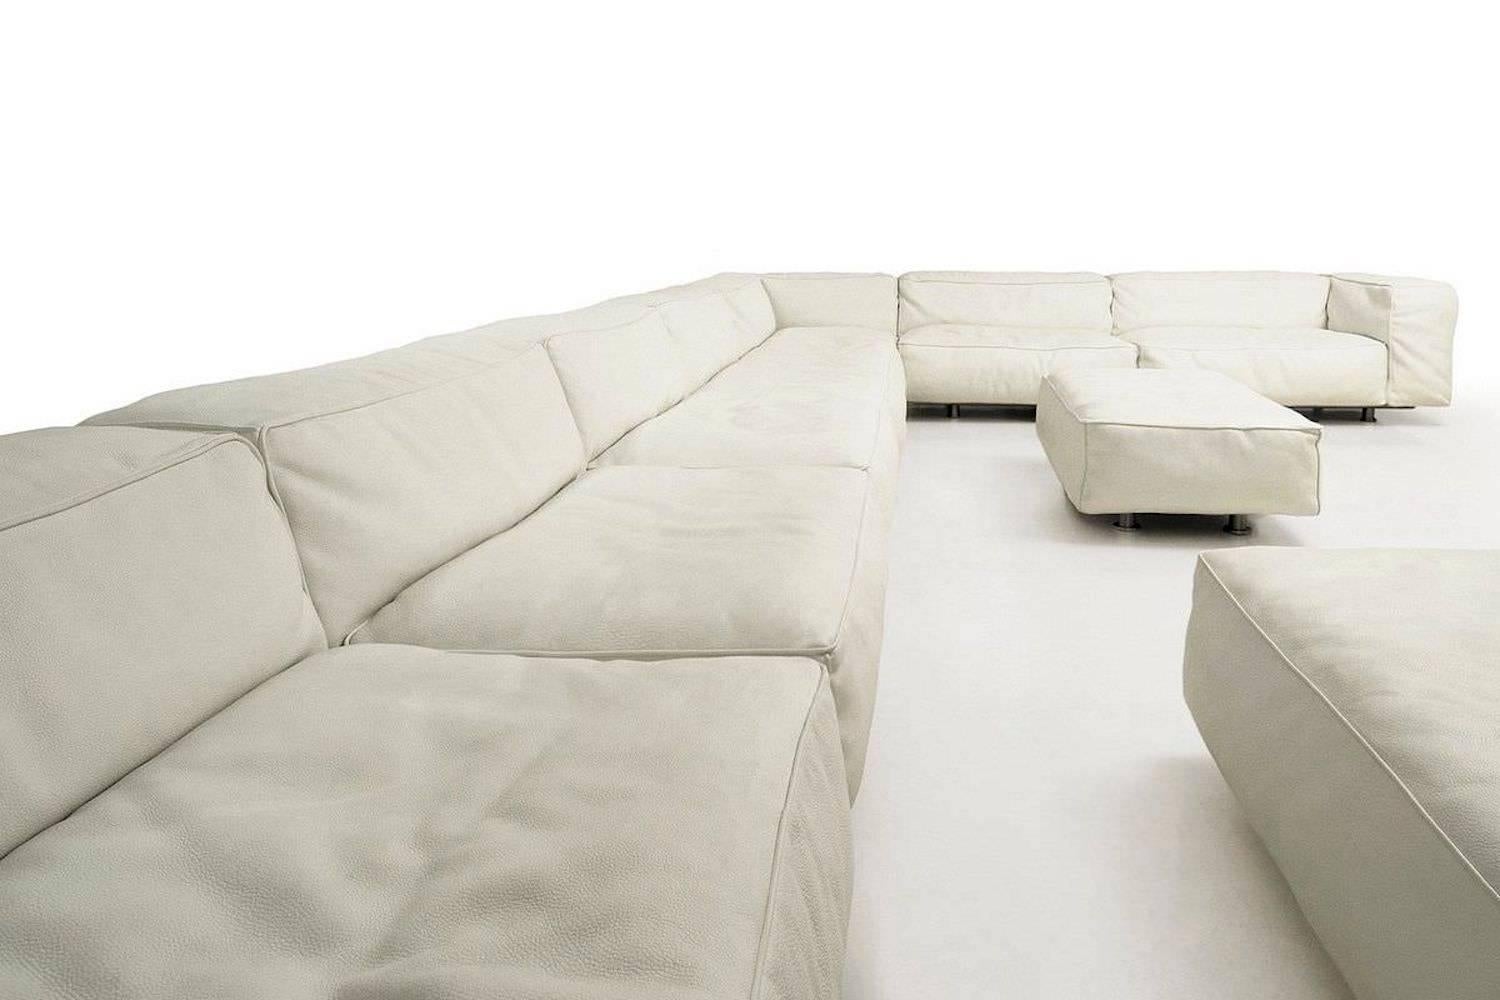 Traditional sofa in shape and size. Elegance and impeccable proportions, enhanced by the uniqueness of the materials. Great stability offered by the steel structure mounted on steel bars, and softness guaranteed by the padding in feather and